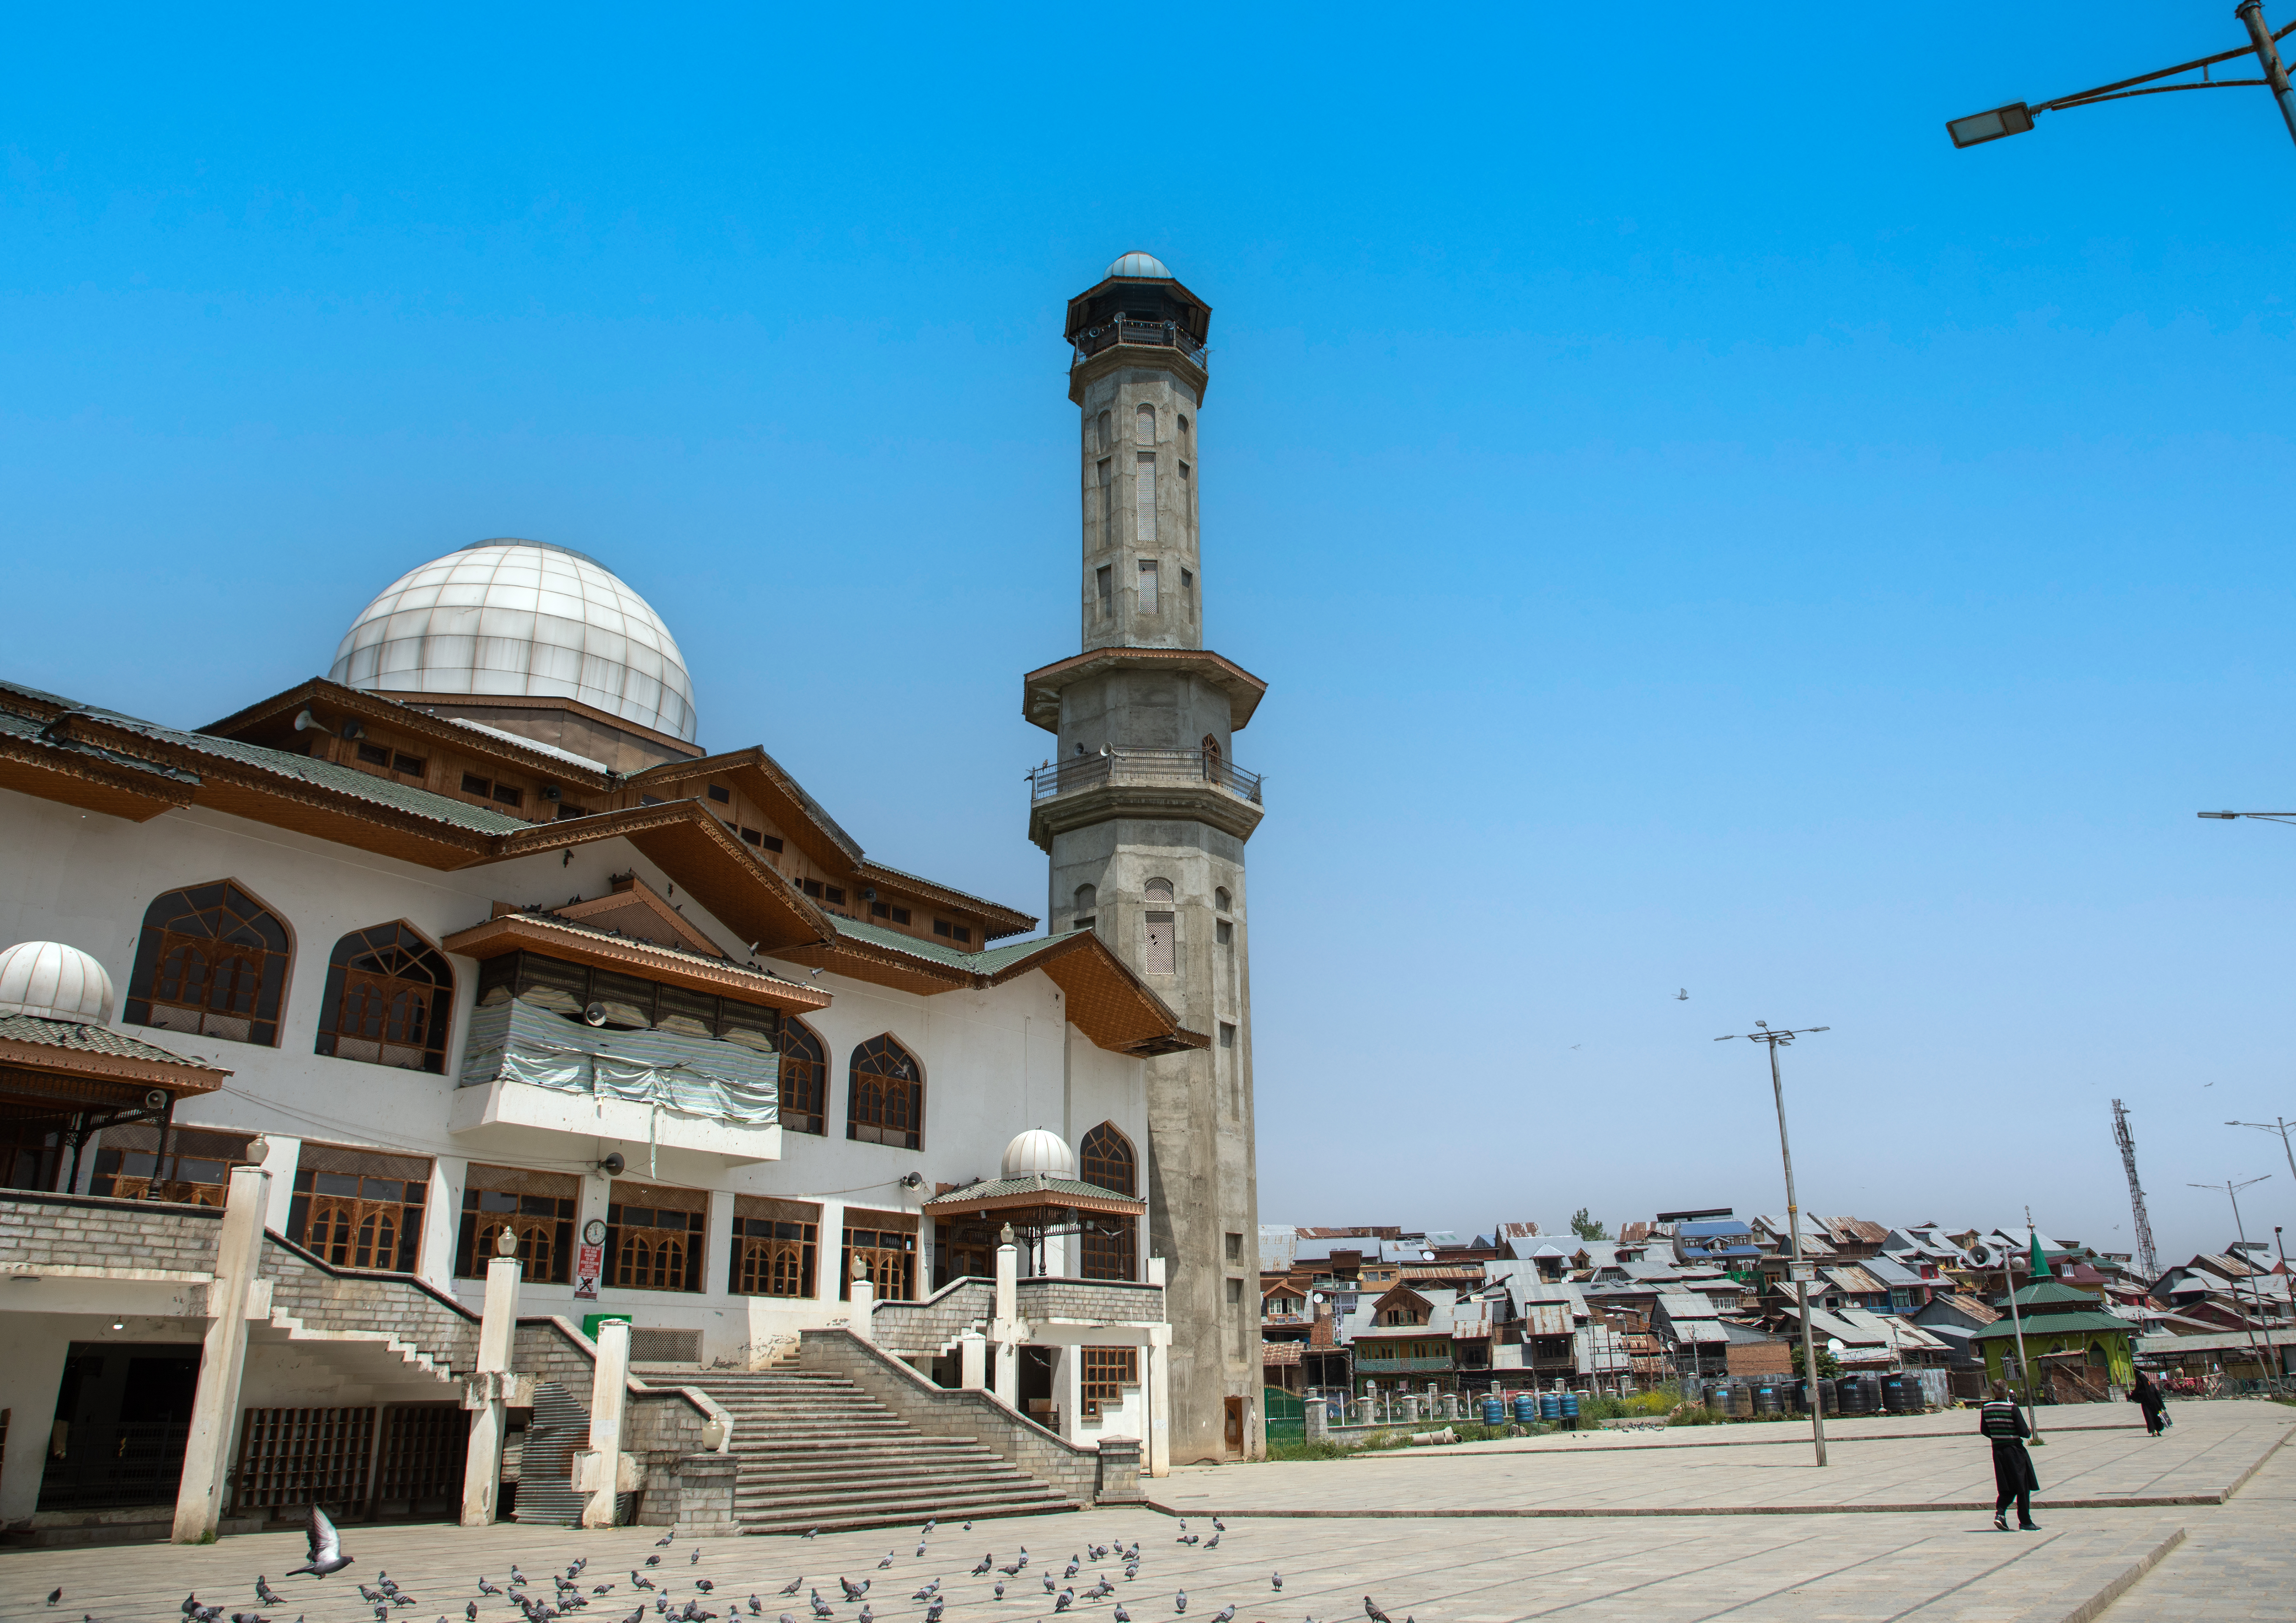 View of a mosque complex with dome and minaret against a blue sky